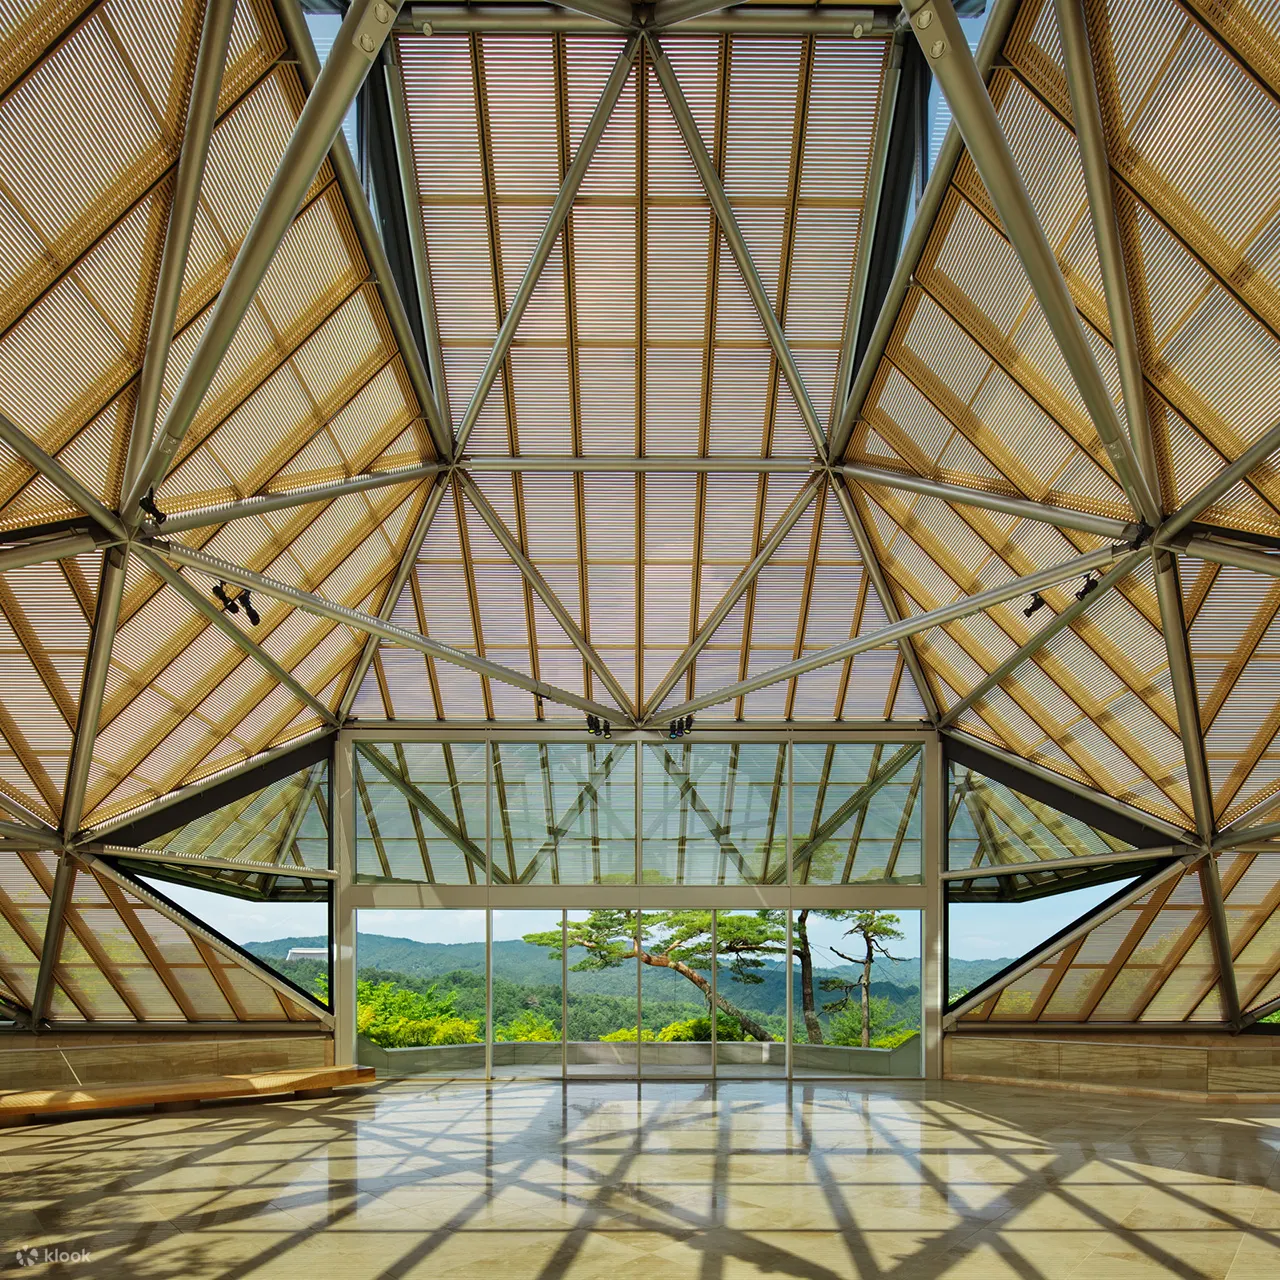 Miho Museum and Shigaraki - A Perfect Day Trip From Kyoto - Blue